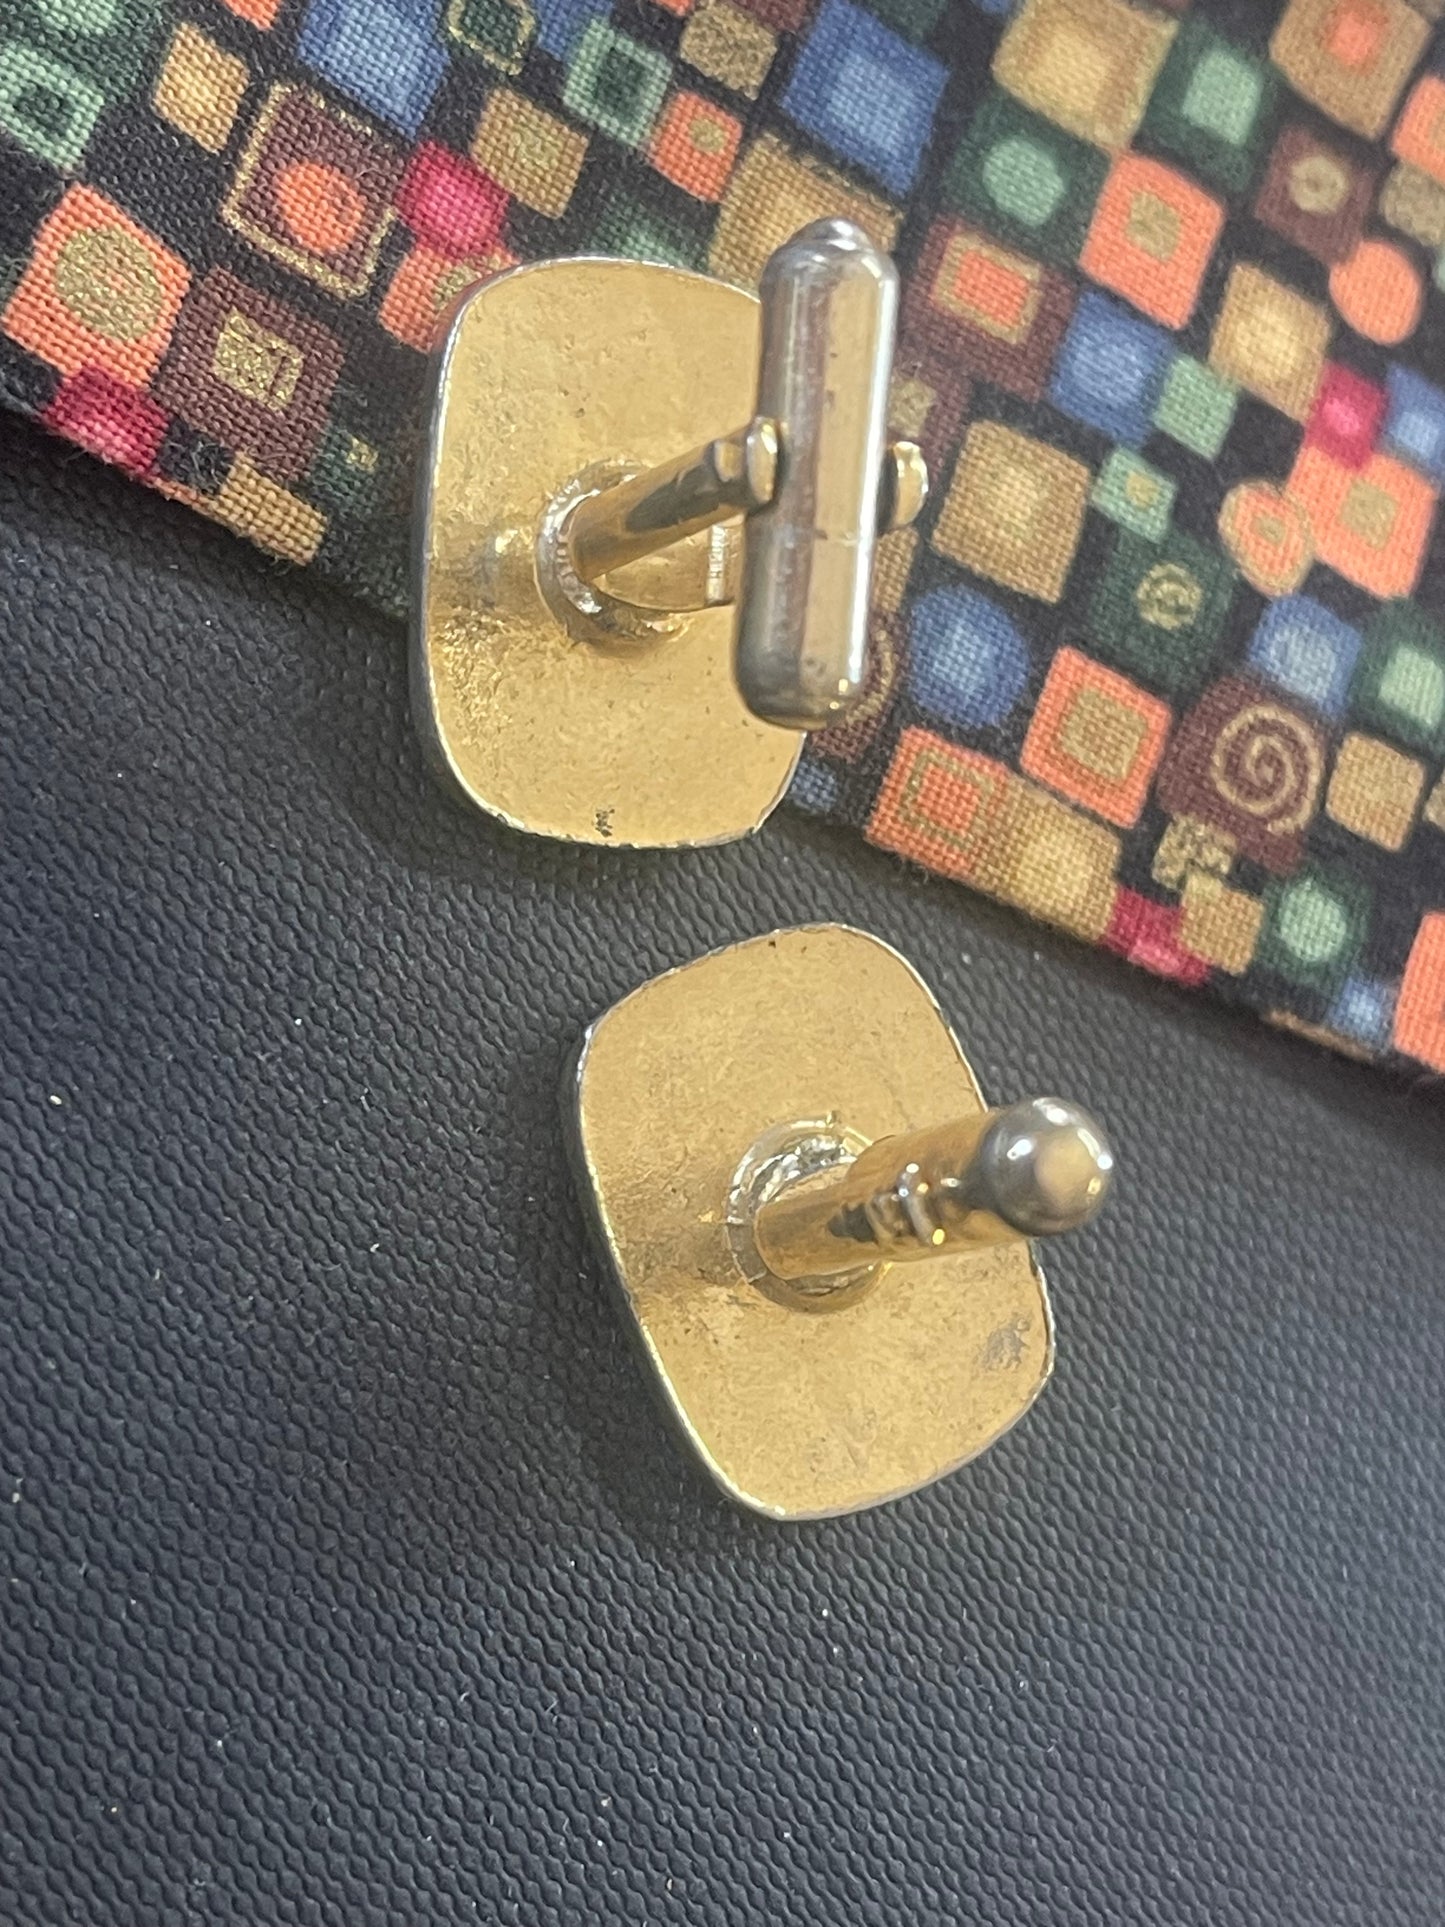 Vintage 80s gold tone cuff links with rhinestones